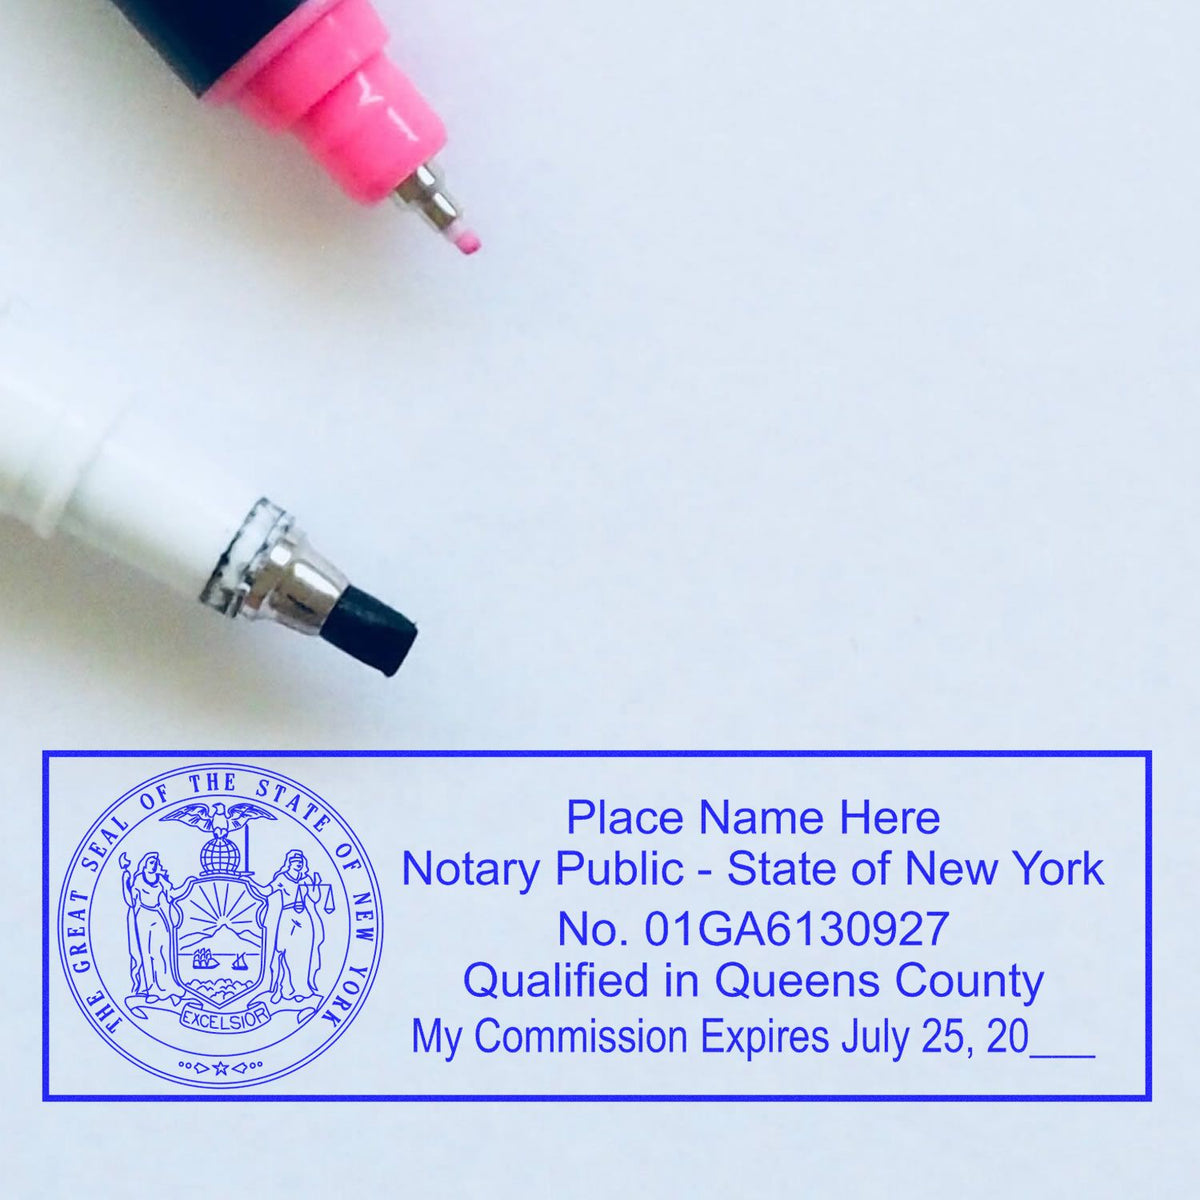 An alternative view of the Super Slim New York Notary Public Stamp stamped on a sheet of paper showing the image in use